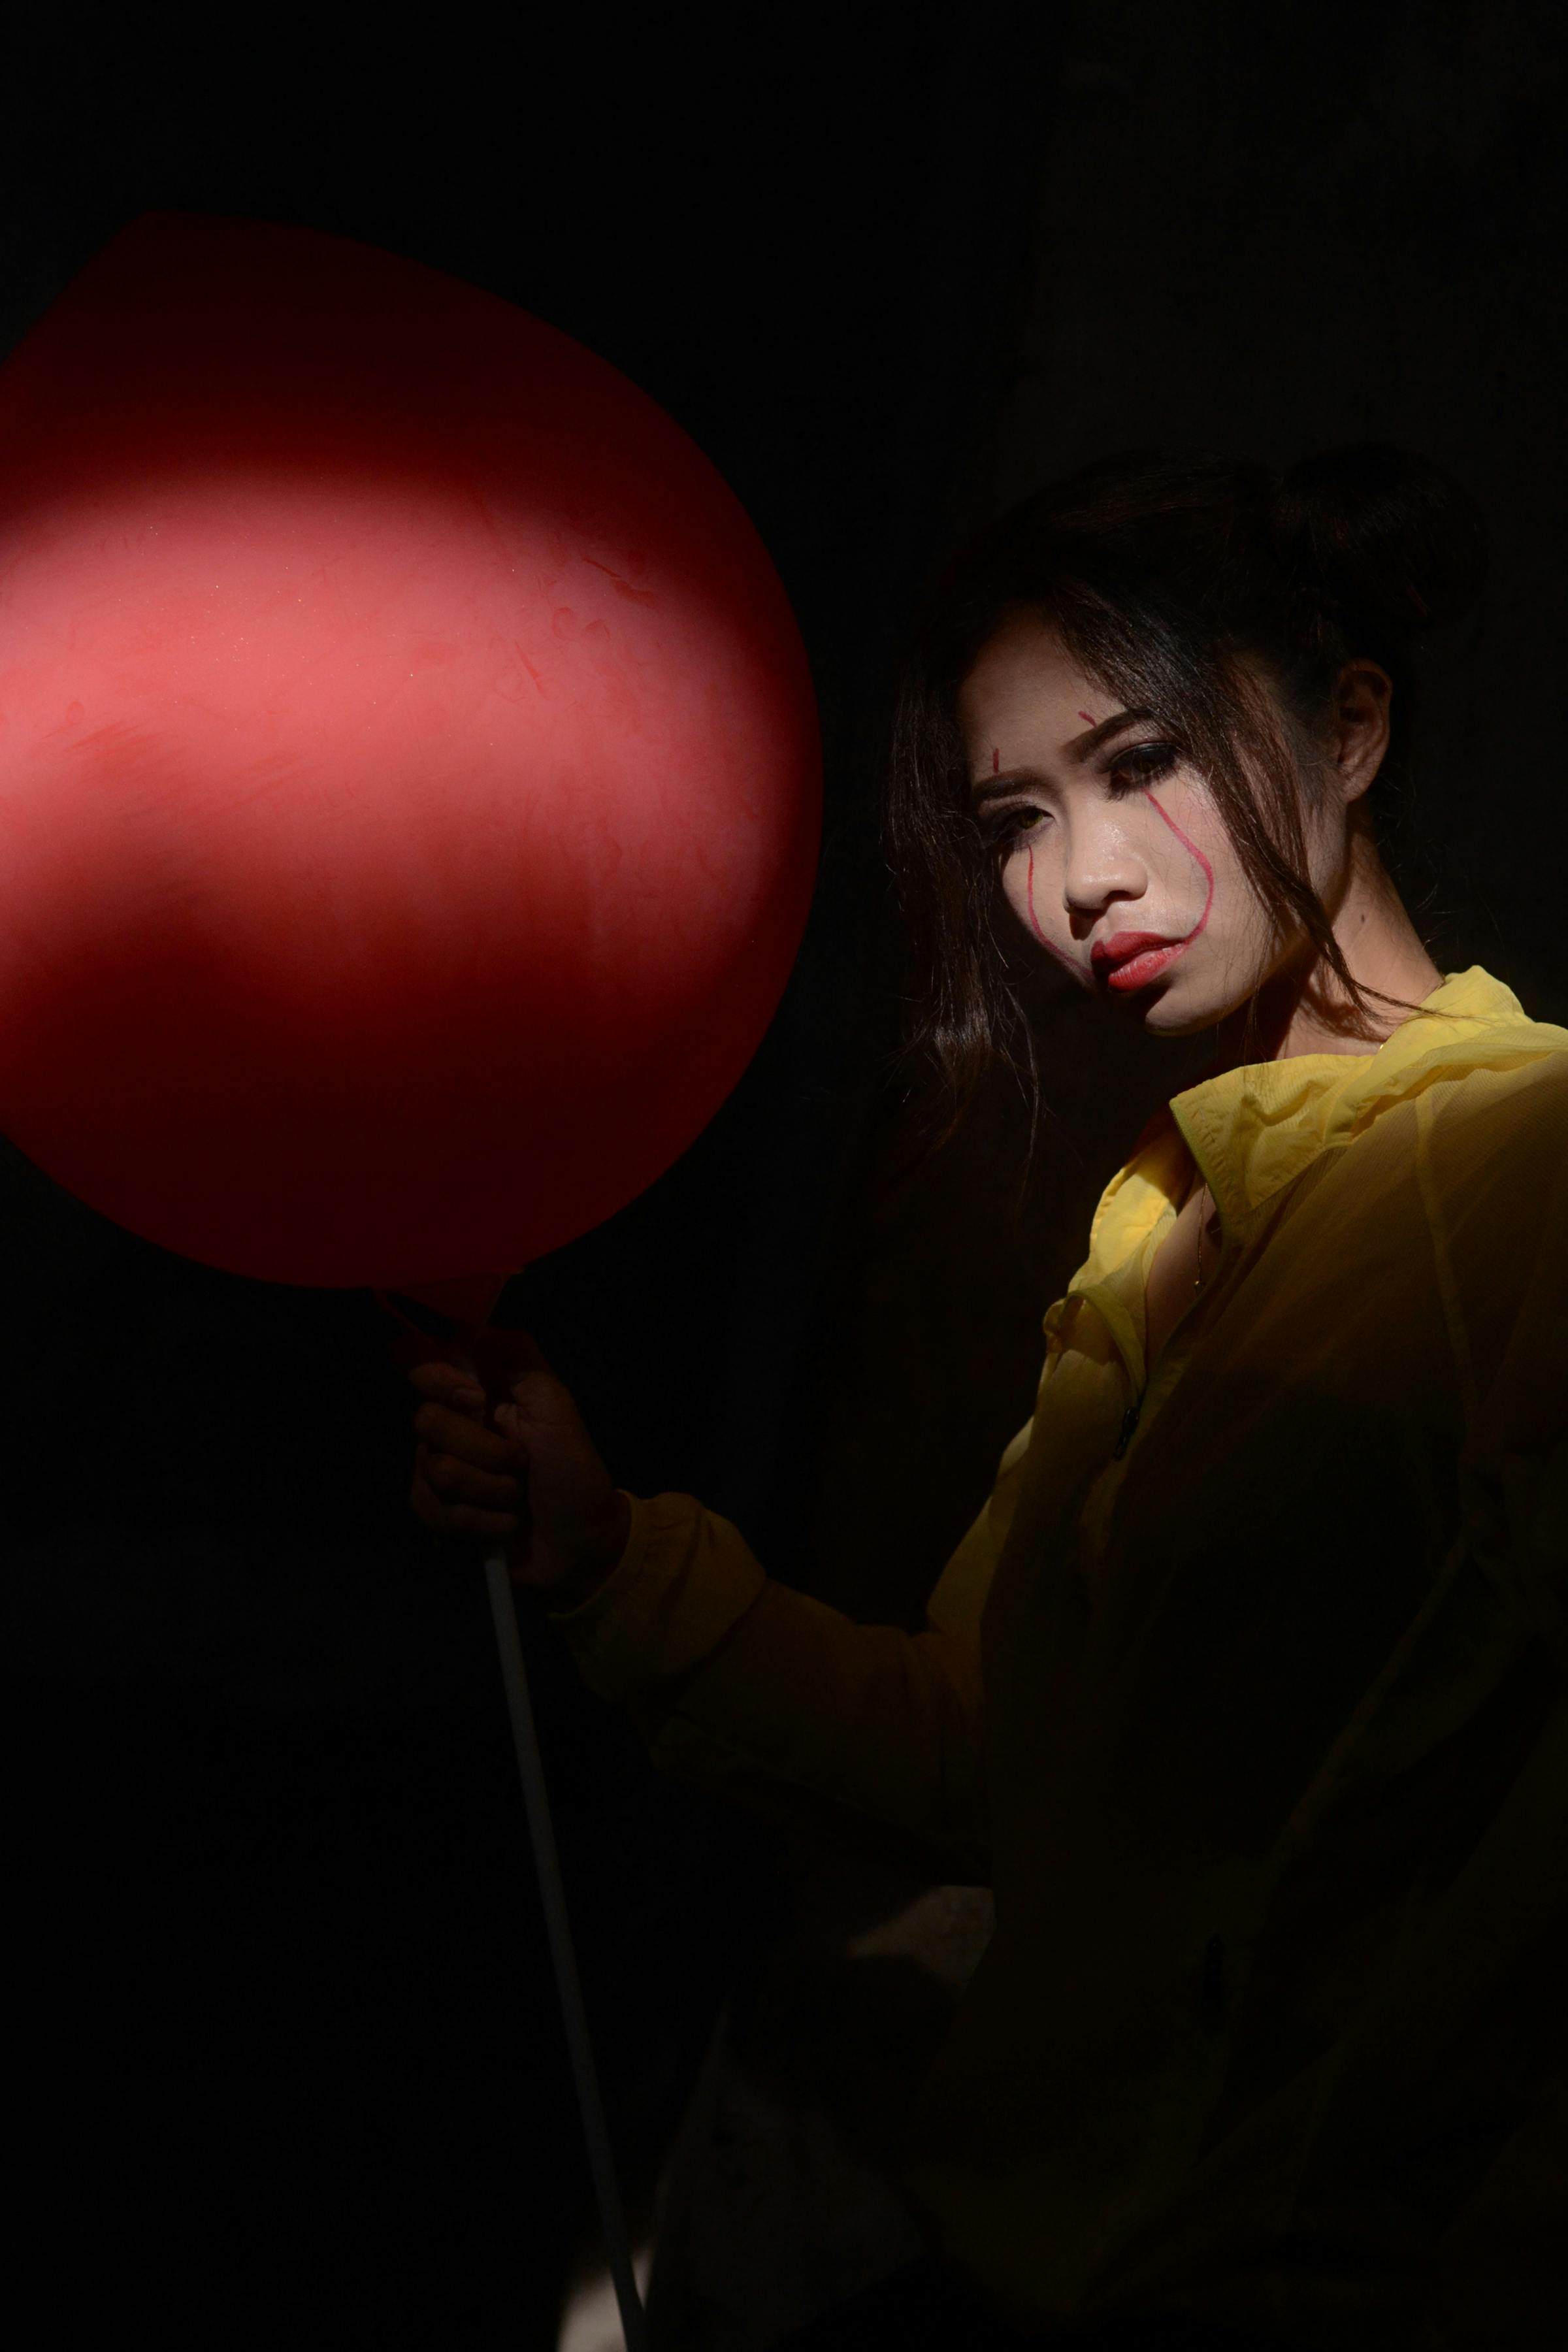 woman wearing yellow top holding red balloon